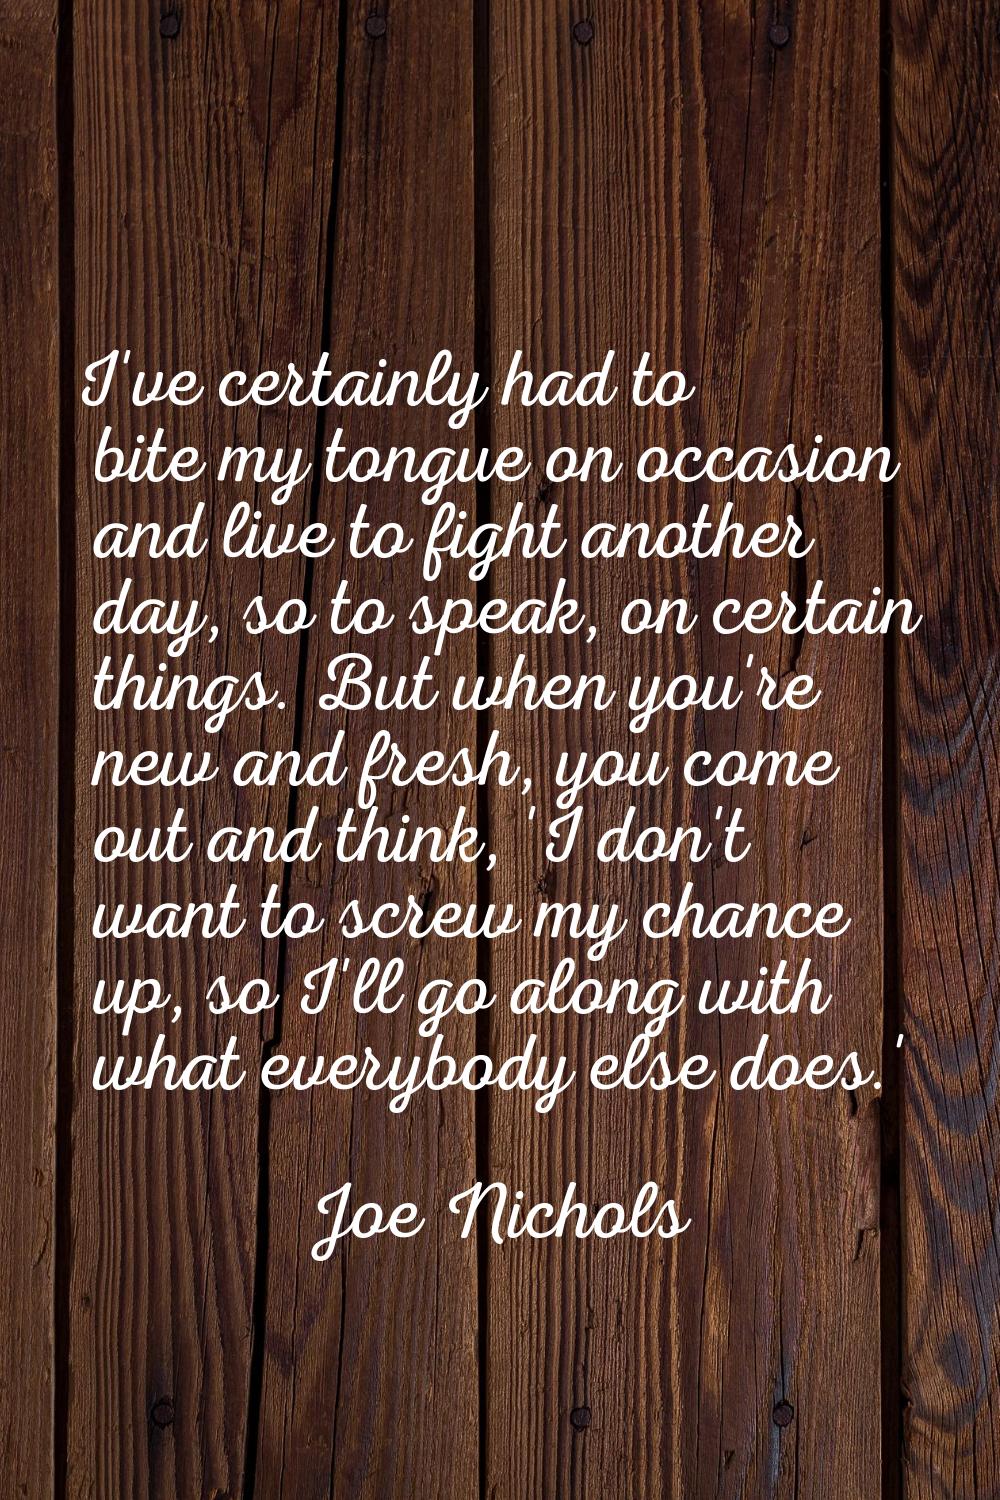 I've certainly had to bite my tongue on occasion and live to fight another day, so to speak, on cer